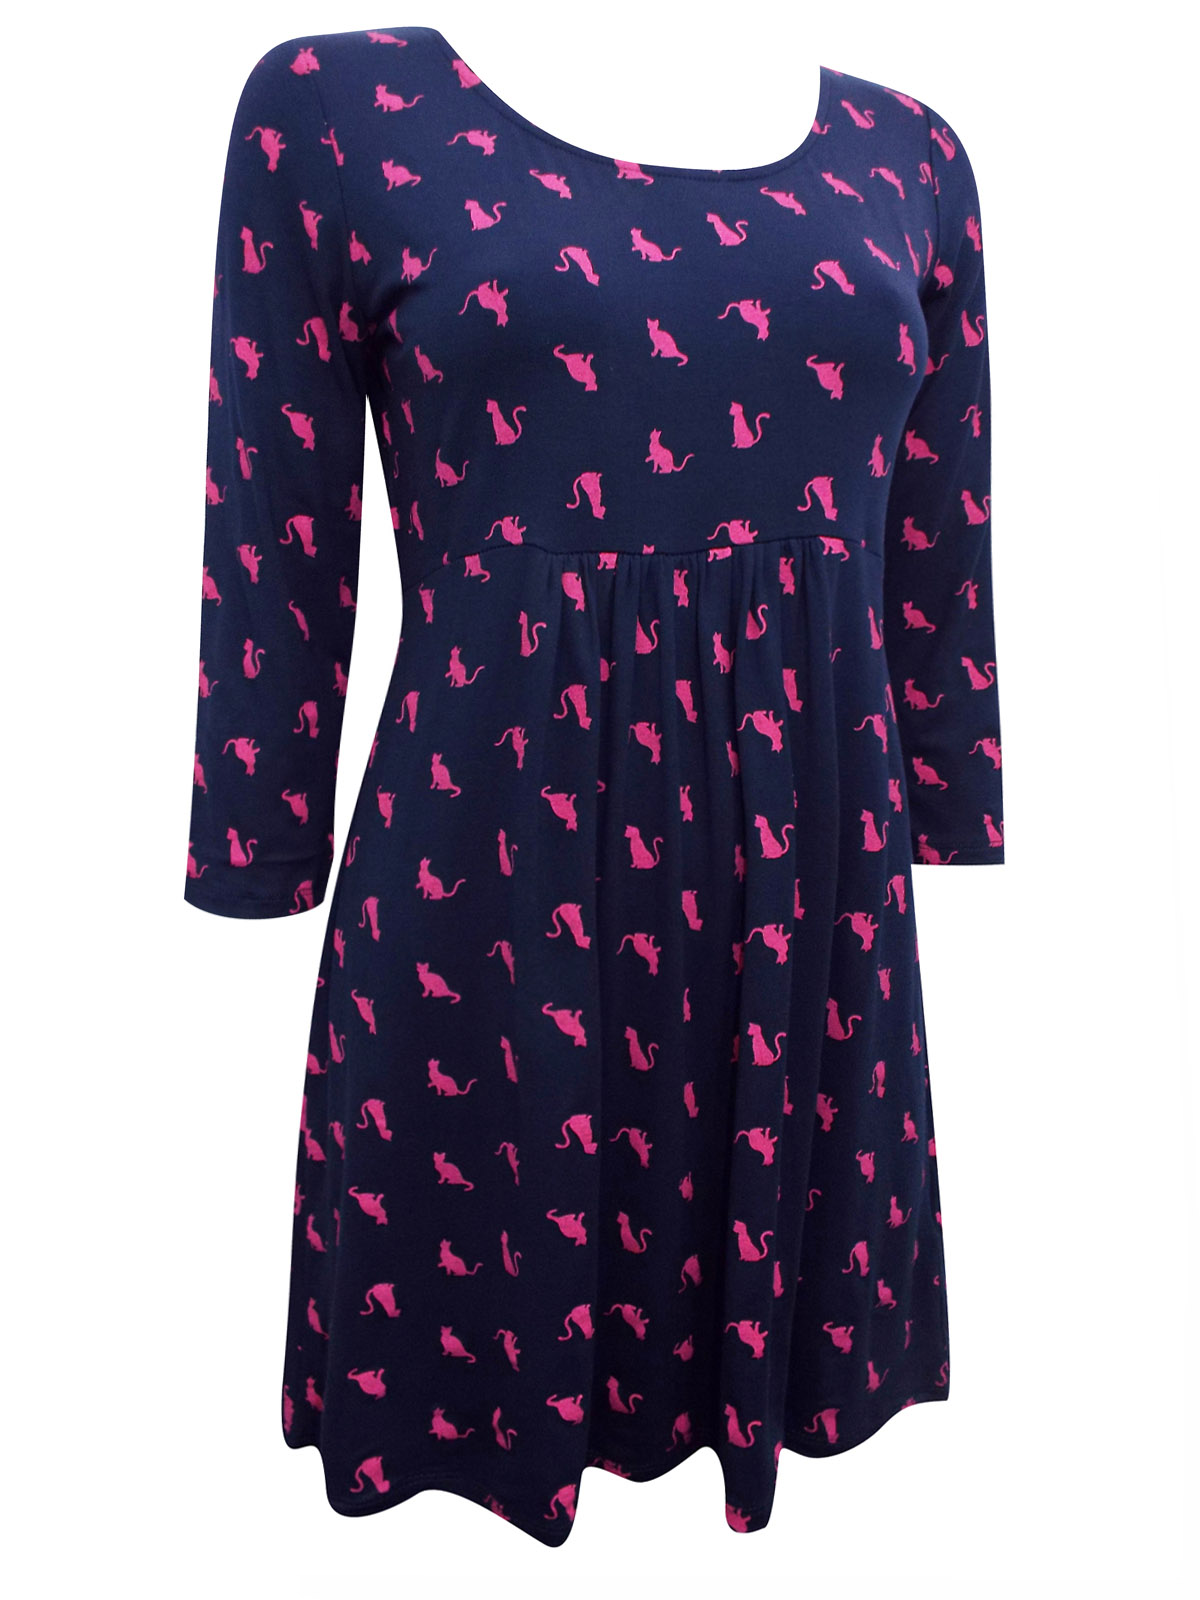 First Avenue NAVY Cat Print 3/4 Sleeve Tunic Top - Size 10 to 20